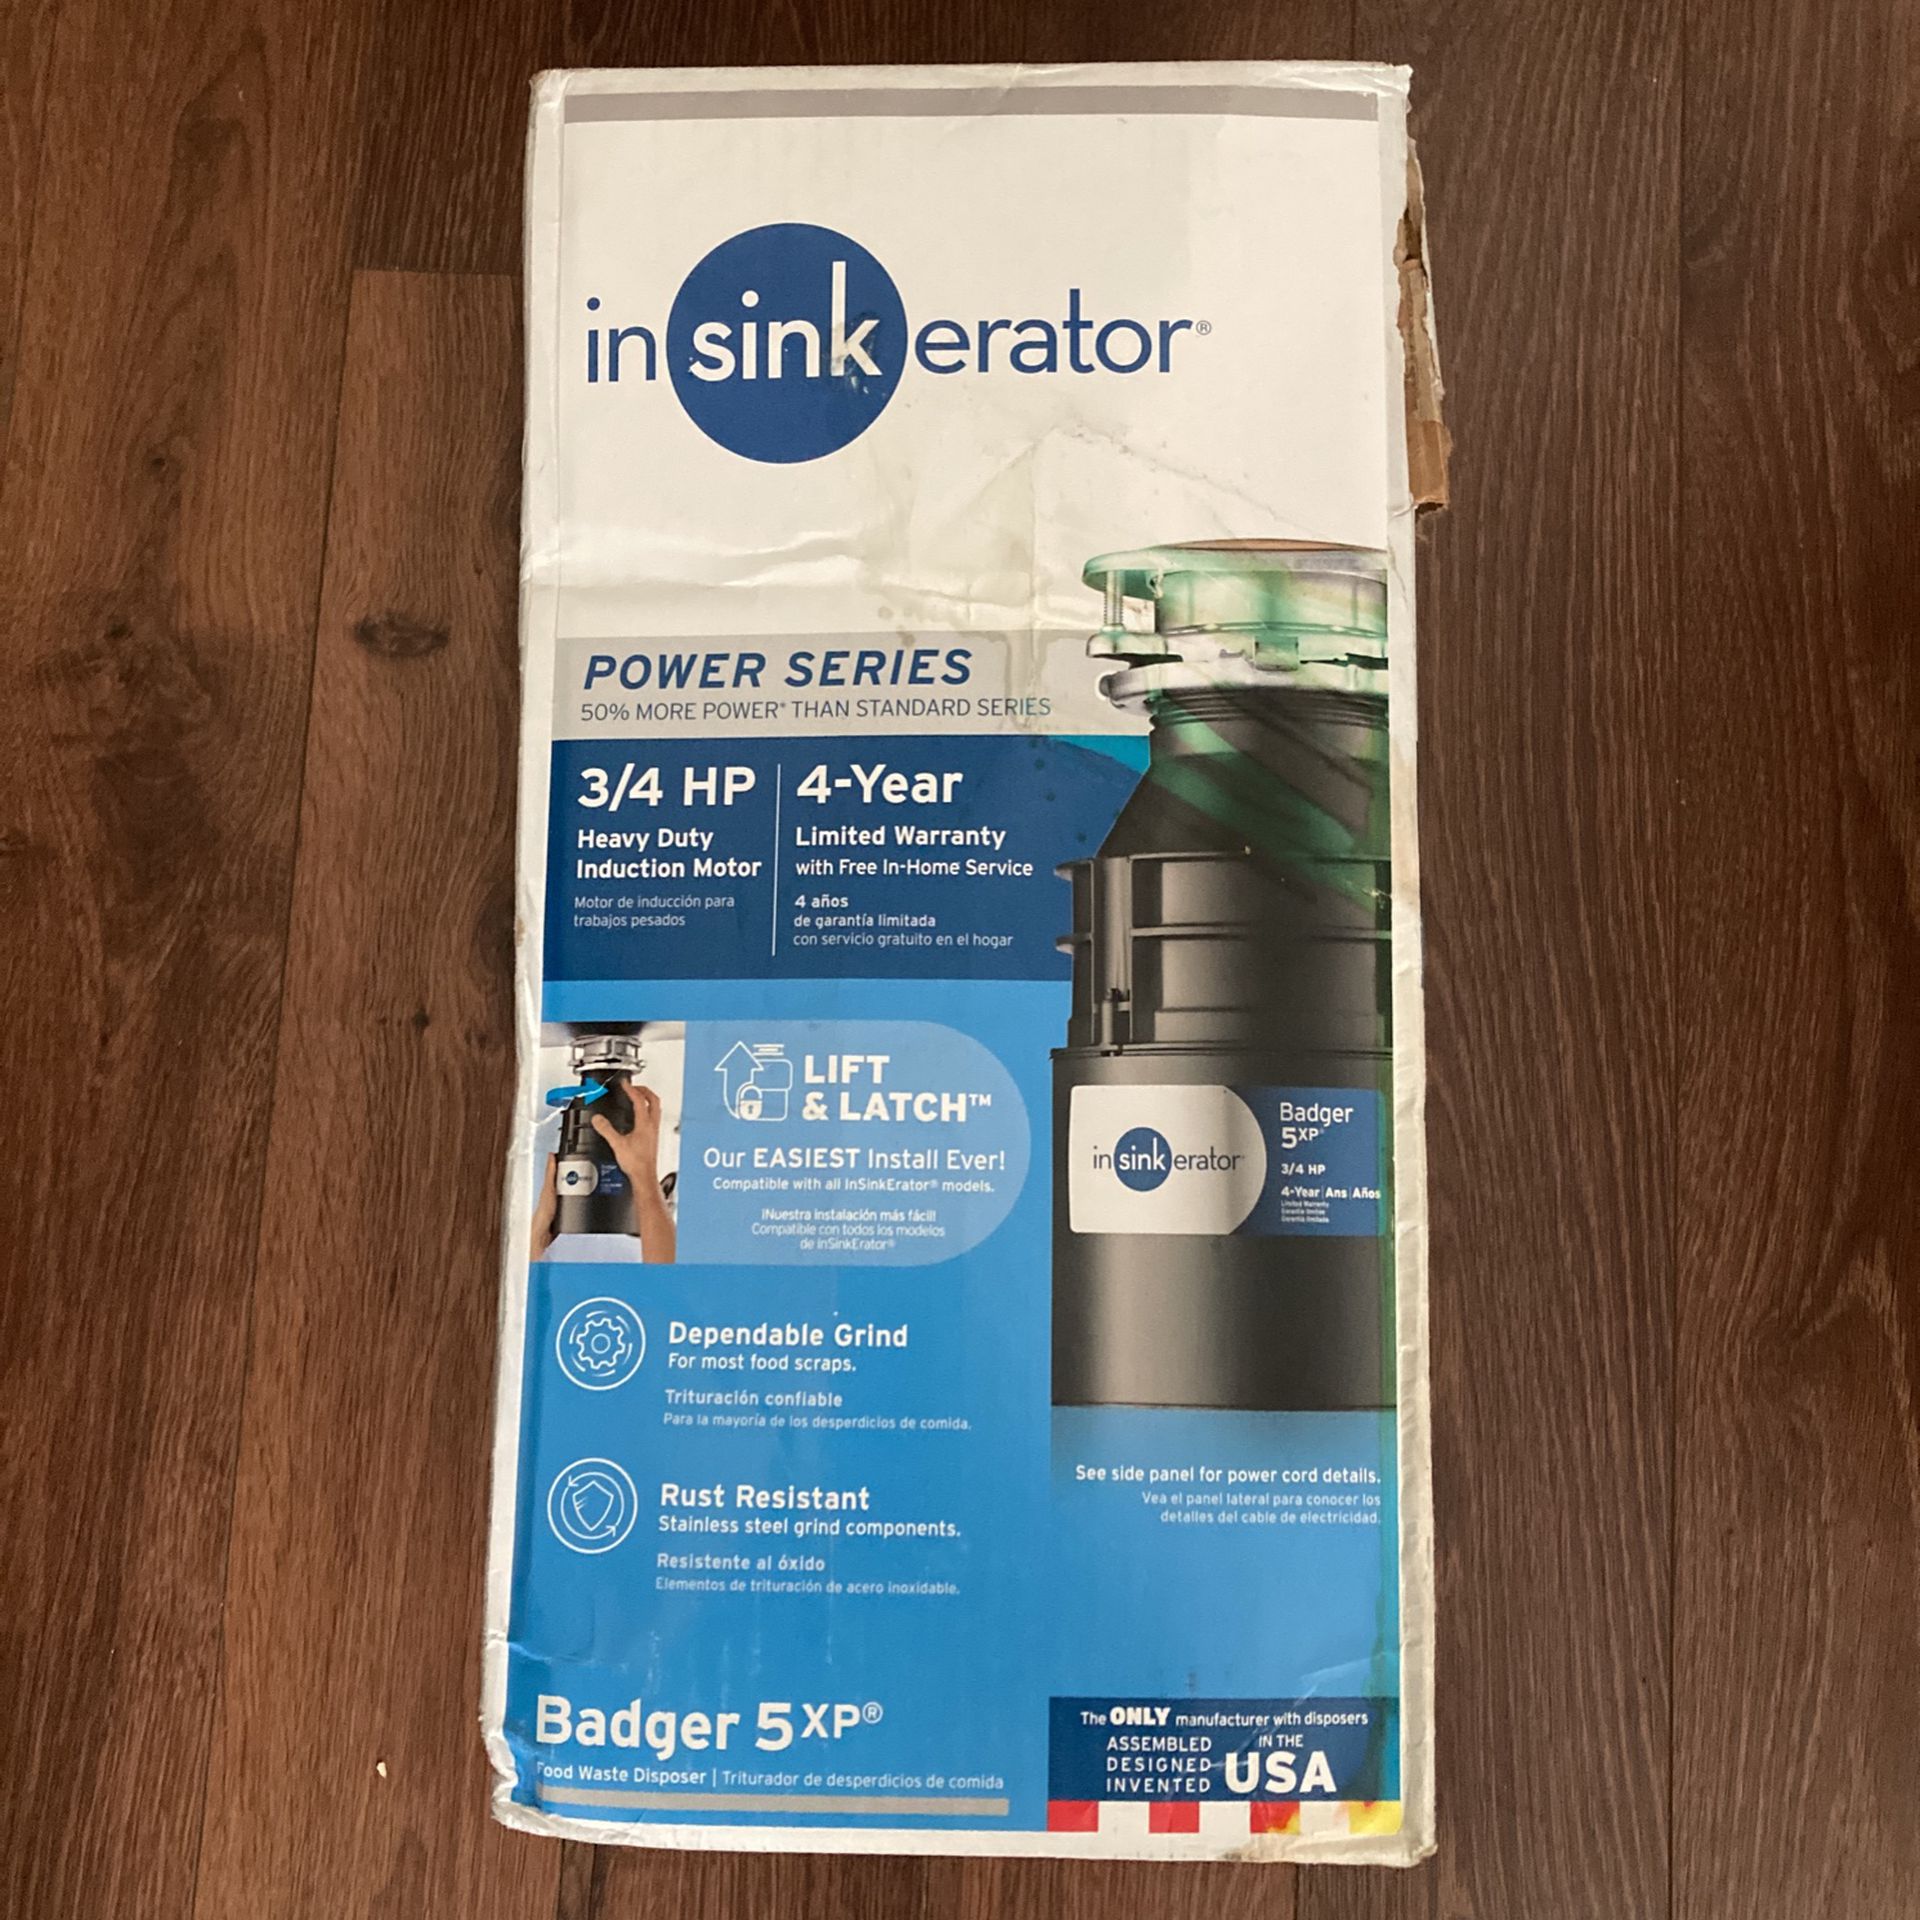 New InSinkErator Badger 5XP Without Power Cord Badger 3/4 Hp Garbage  Disposal for Sale in Phoenix, AZ OfferUp